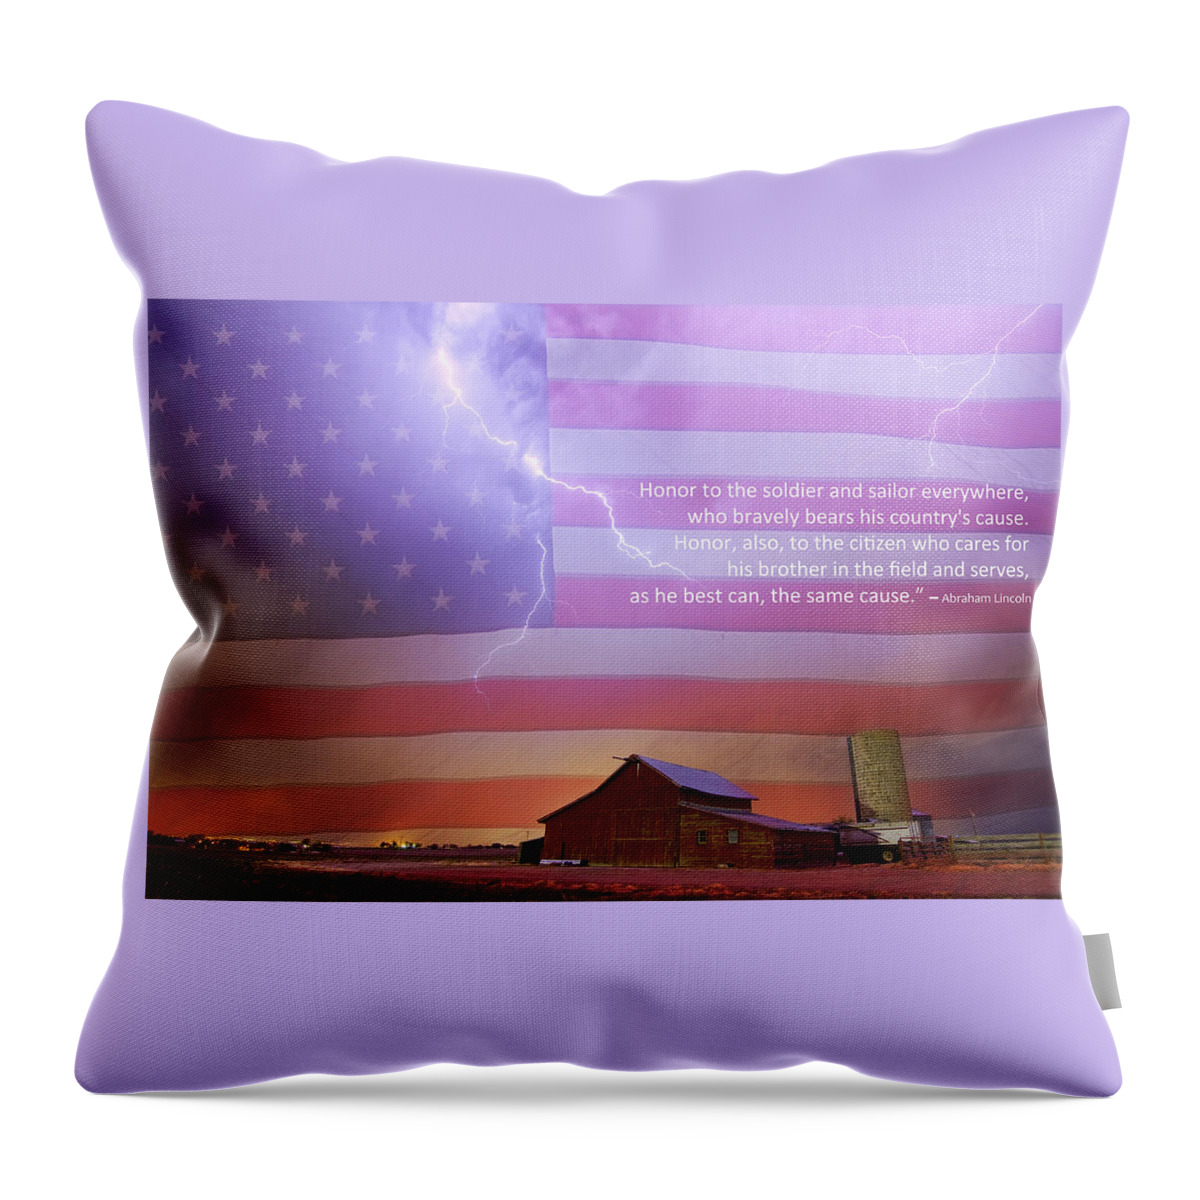 Usa Throw Pillow featuring the photograph Honor To The Soldier And Sailor Everywhere by James BO Insogna